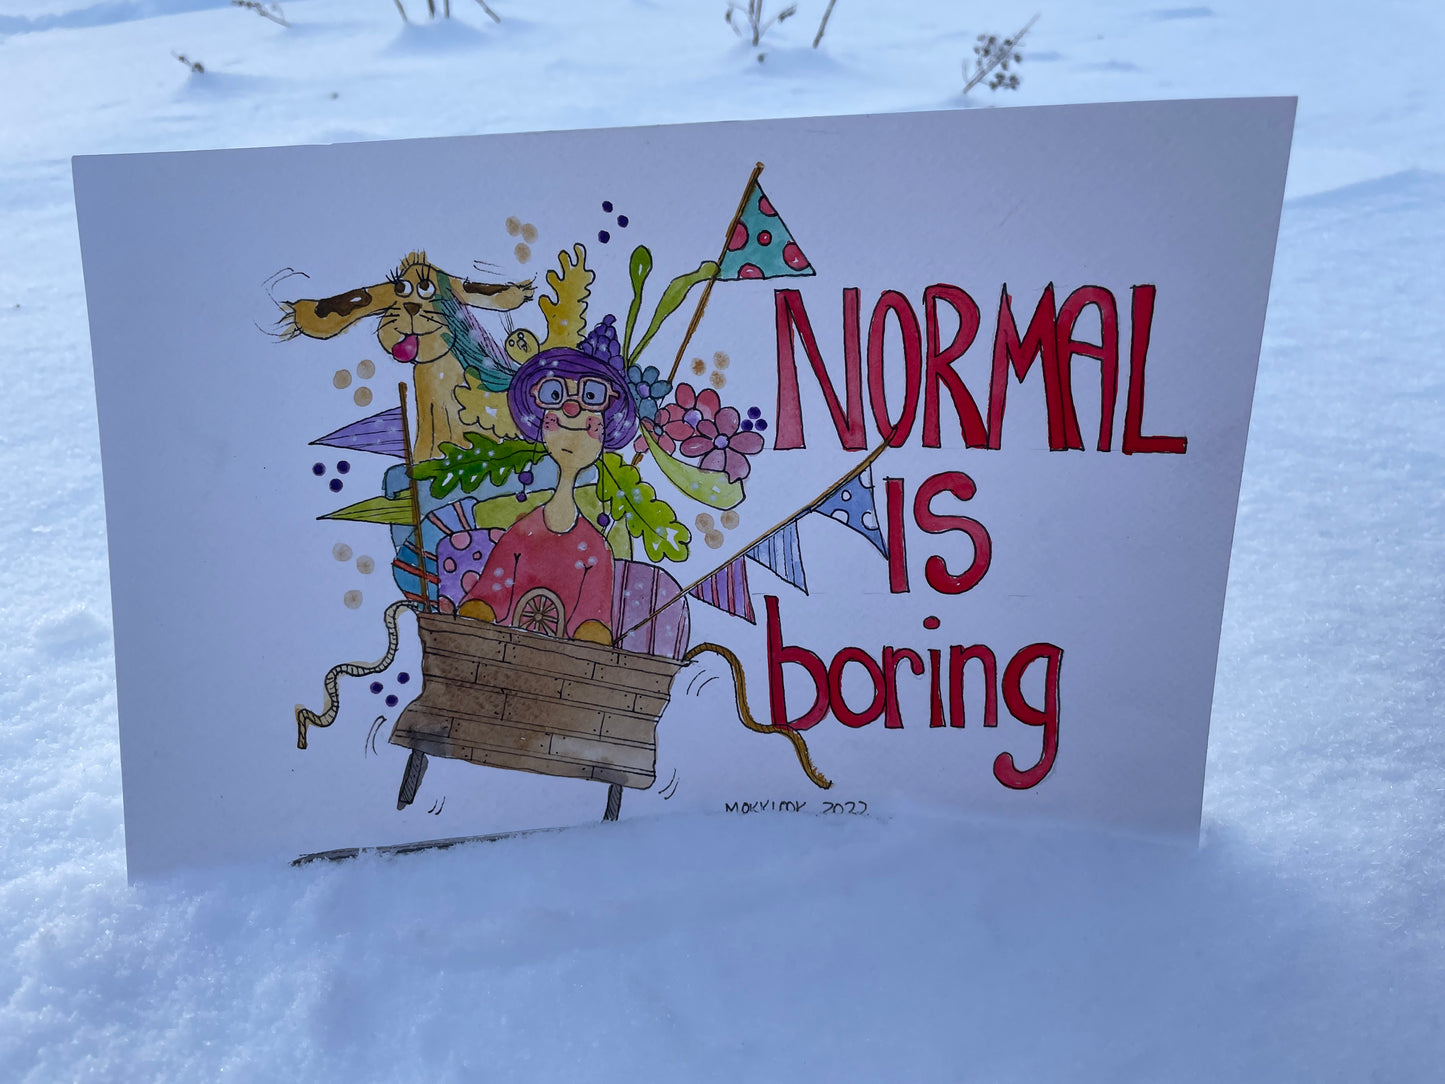 "Normal is  boring"